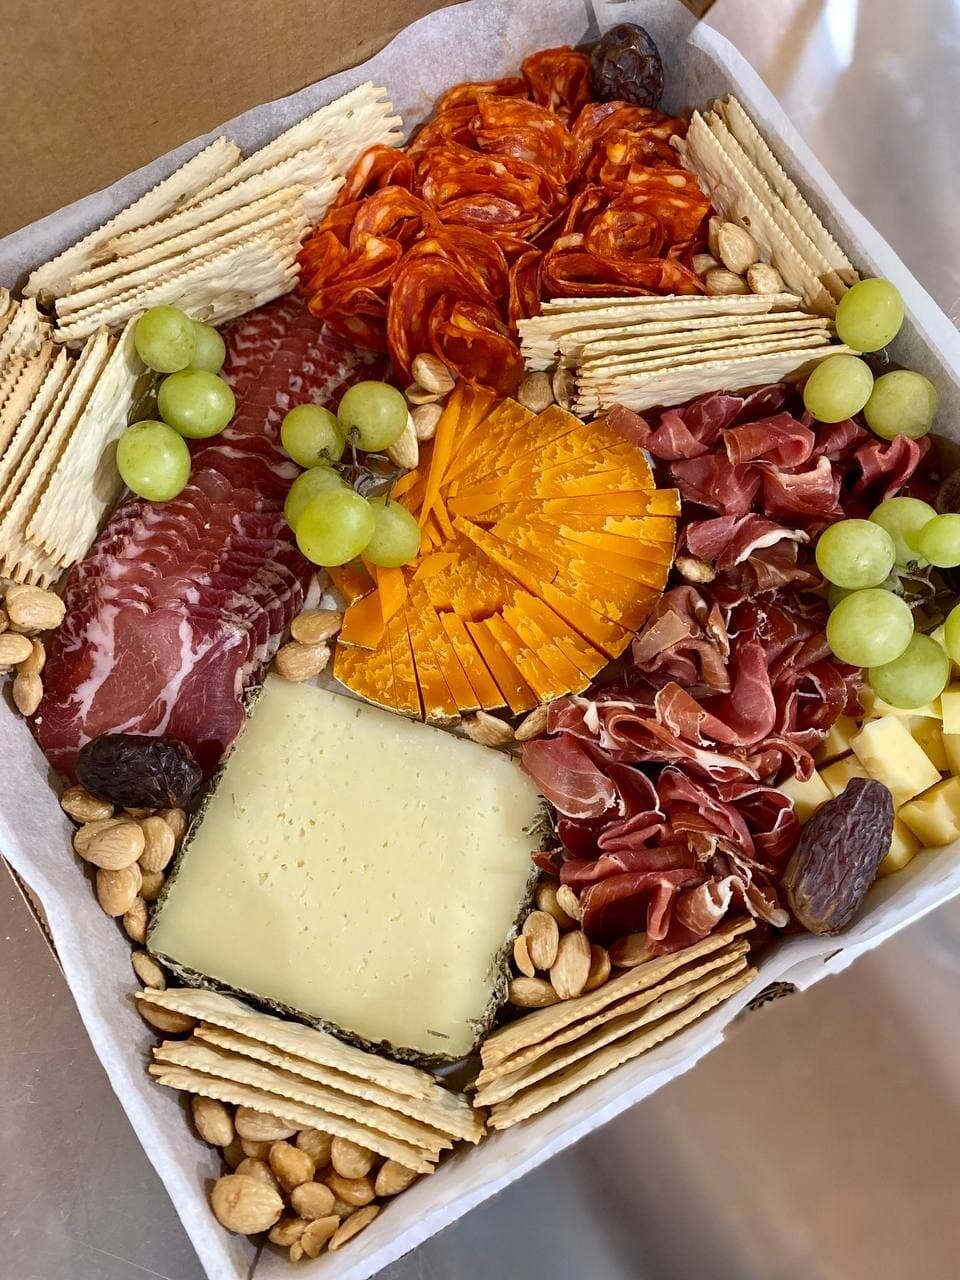 Medium Cheese and Charcuterie Platter 